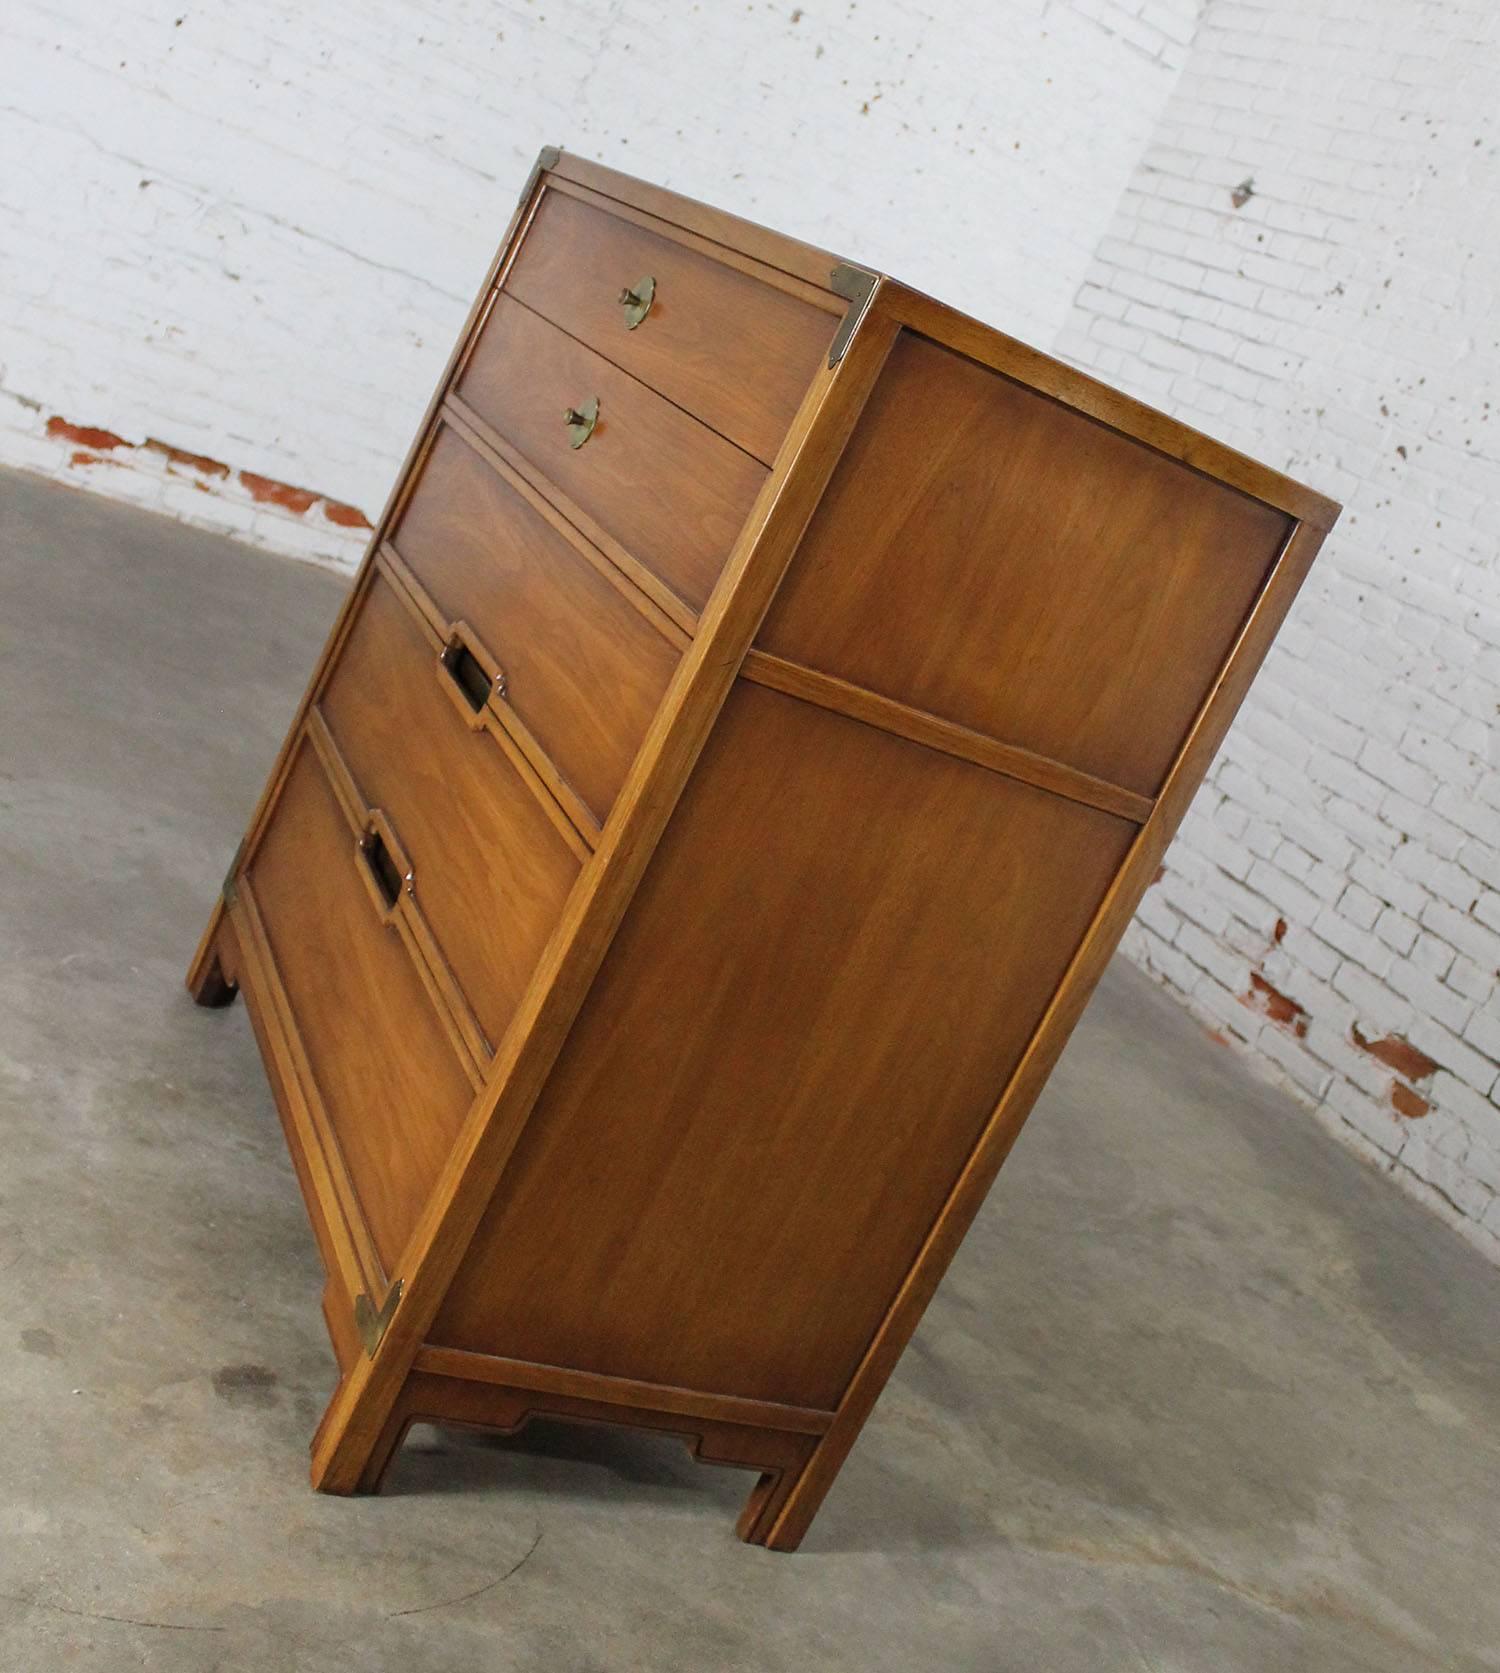 Handsome vintage Mid-Century Campaign style five-drawer chest of drawers by Drexel from their Compass collection. In wonderful condition, circa 1960s with the normal small nicks and dings you would expect with age and use.

This is an incredible